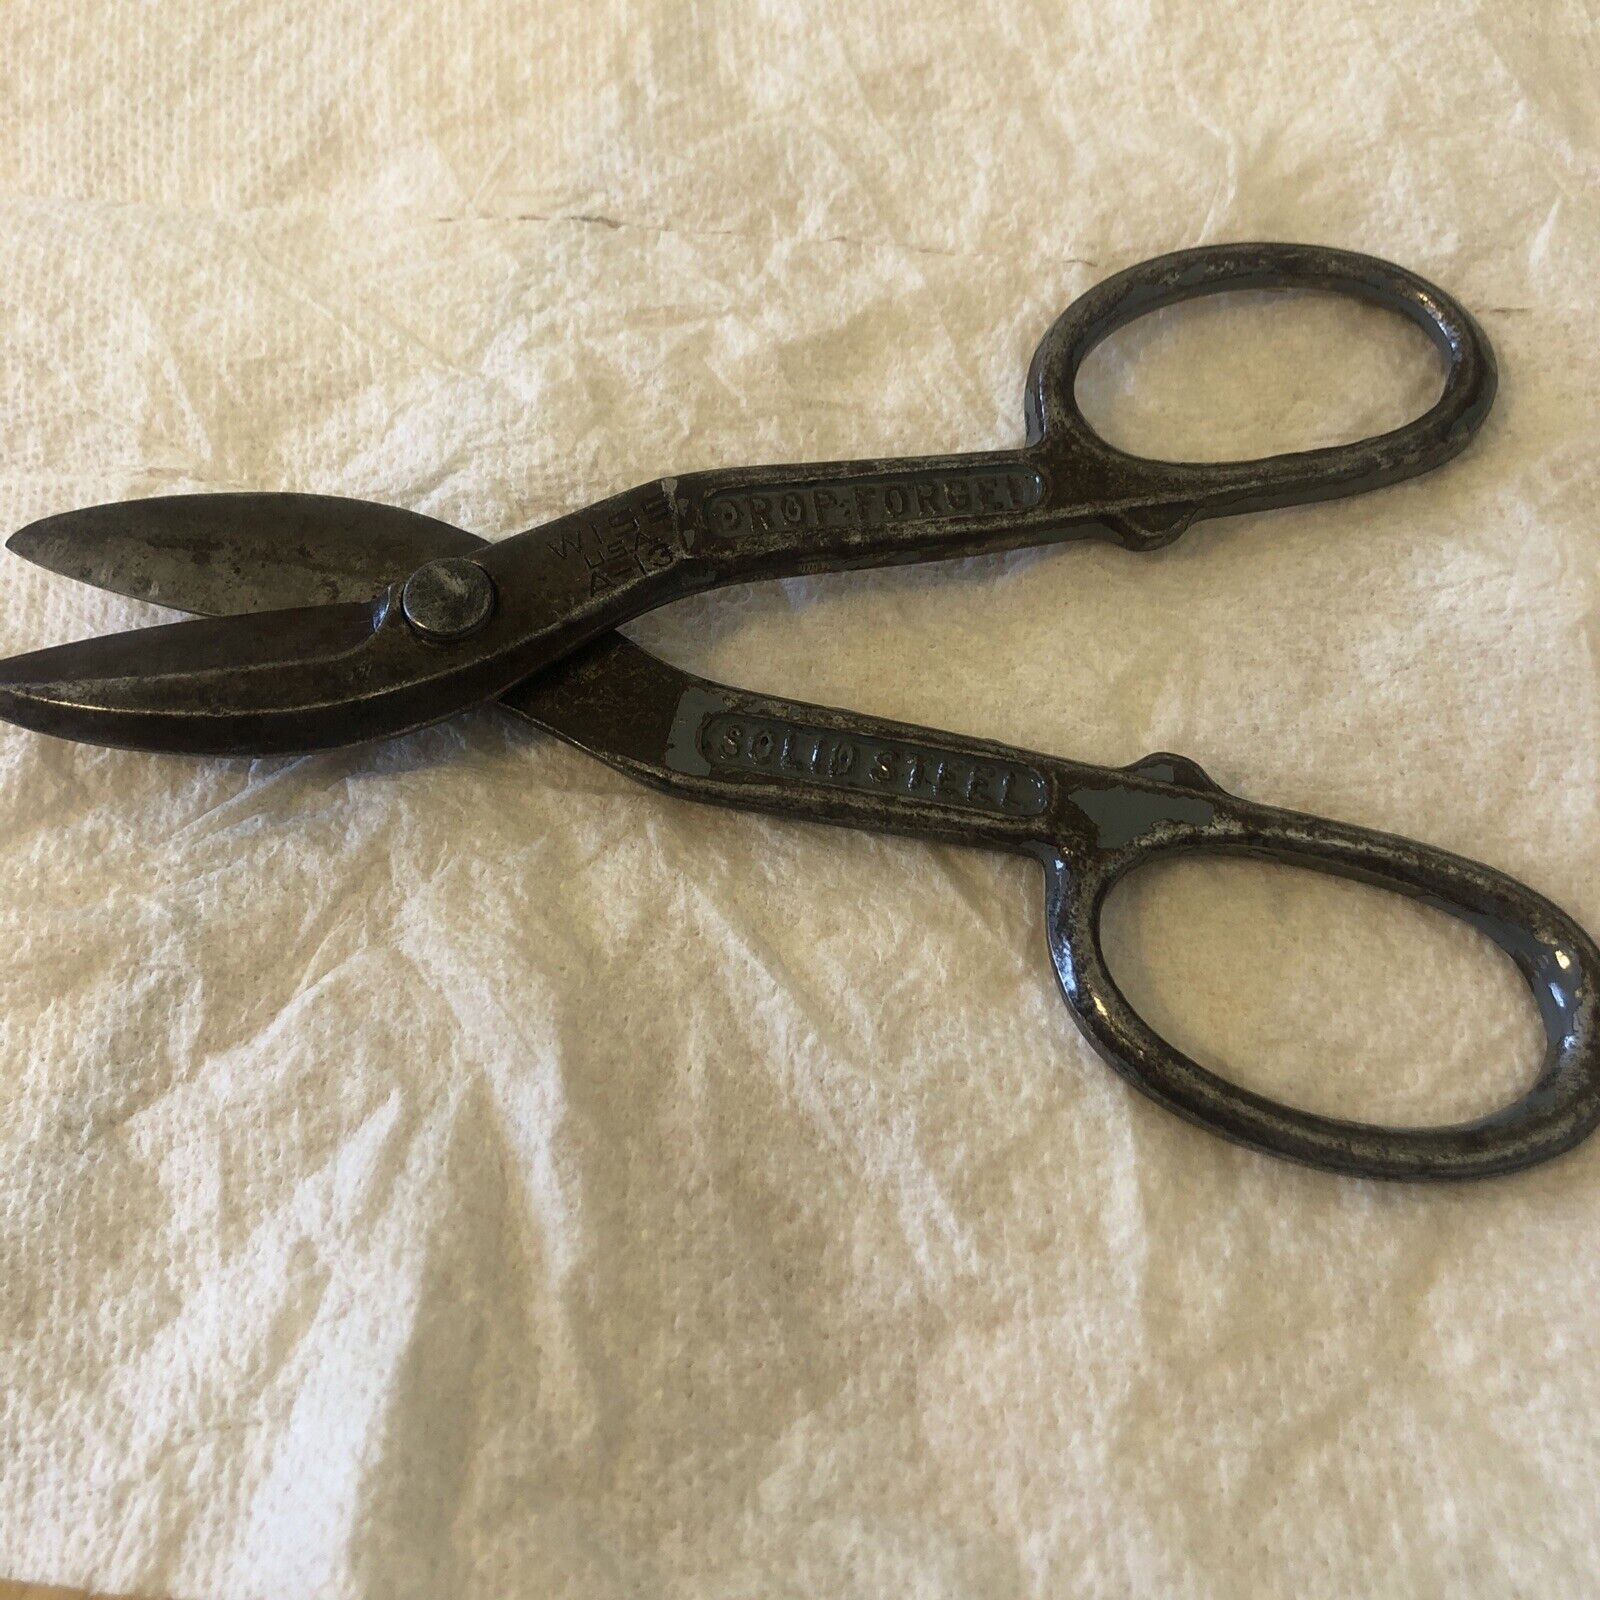 Vintage Wiss A-13 Tin Snips 8” Drop Forged Solid Steel Metal Shears Used Old